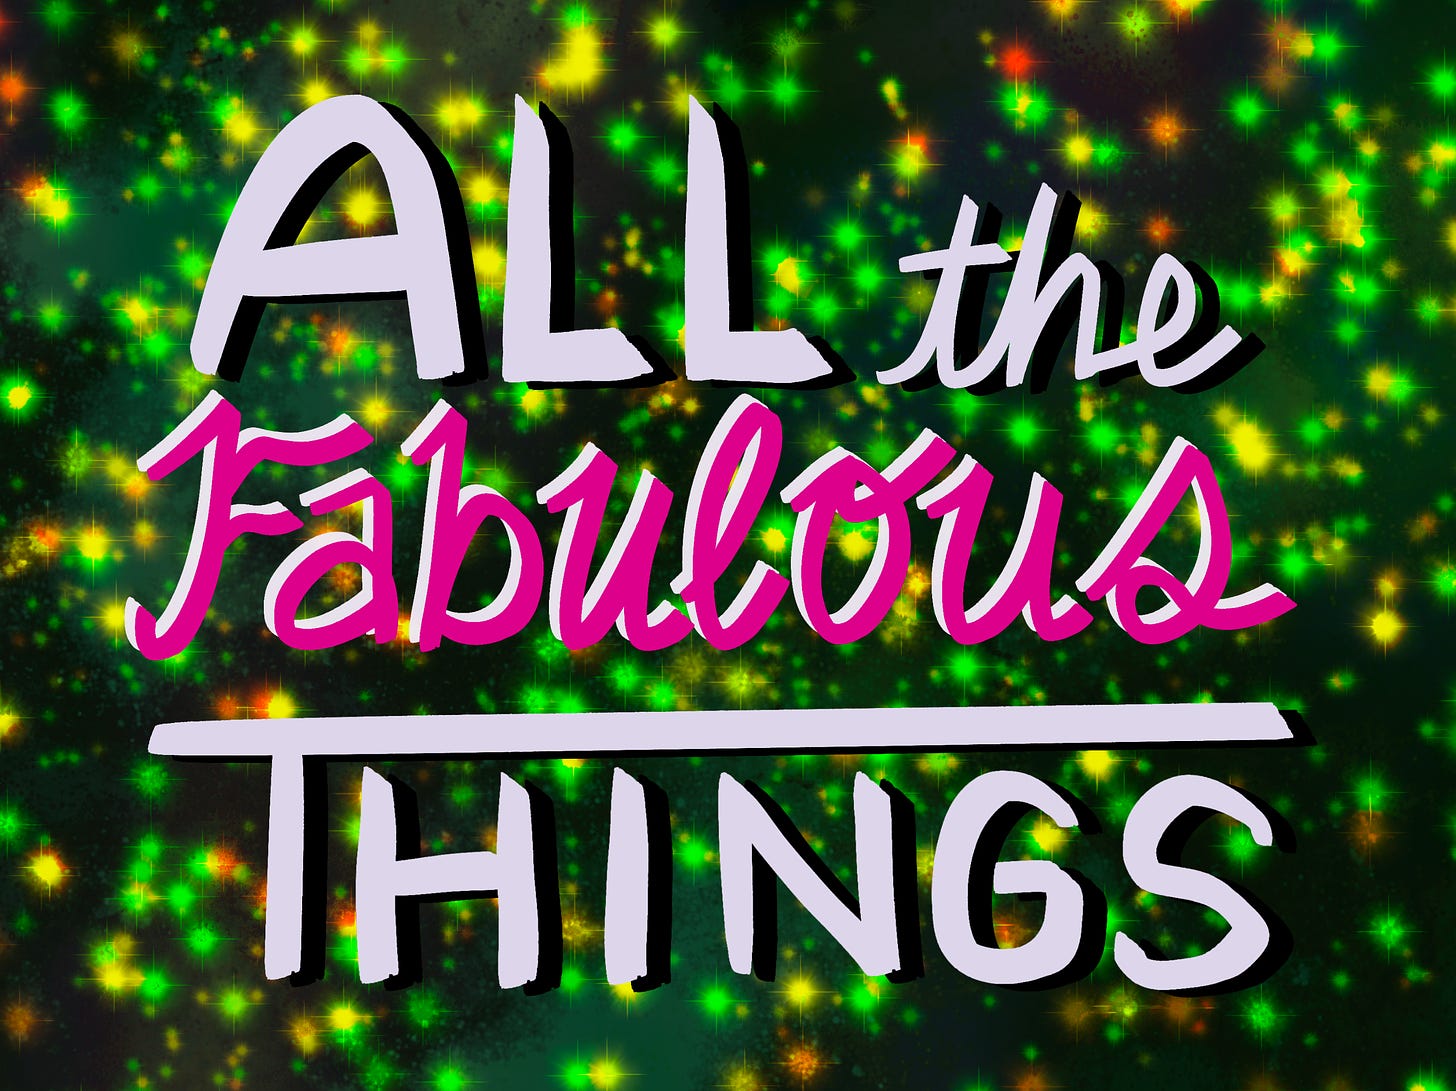 "All the fabulous things" in hand lettering set against a cosmically green background.